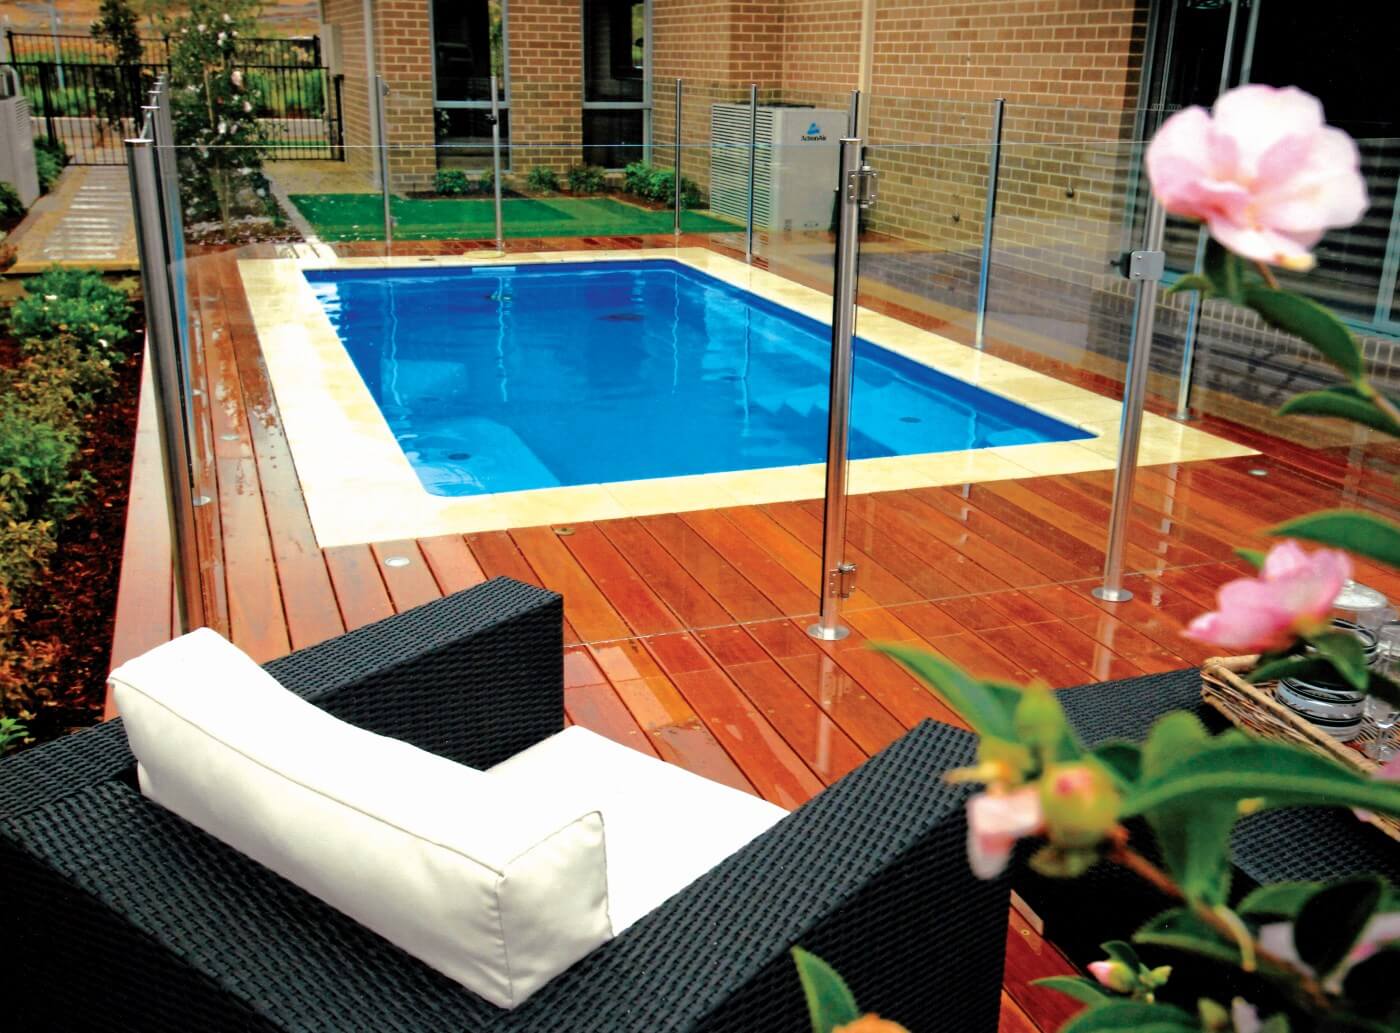 The Best Pool Design Ideas For Your Backyard Compass Pools Australia